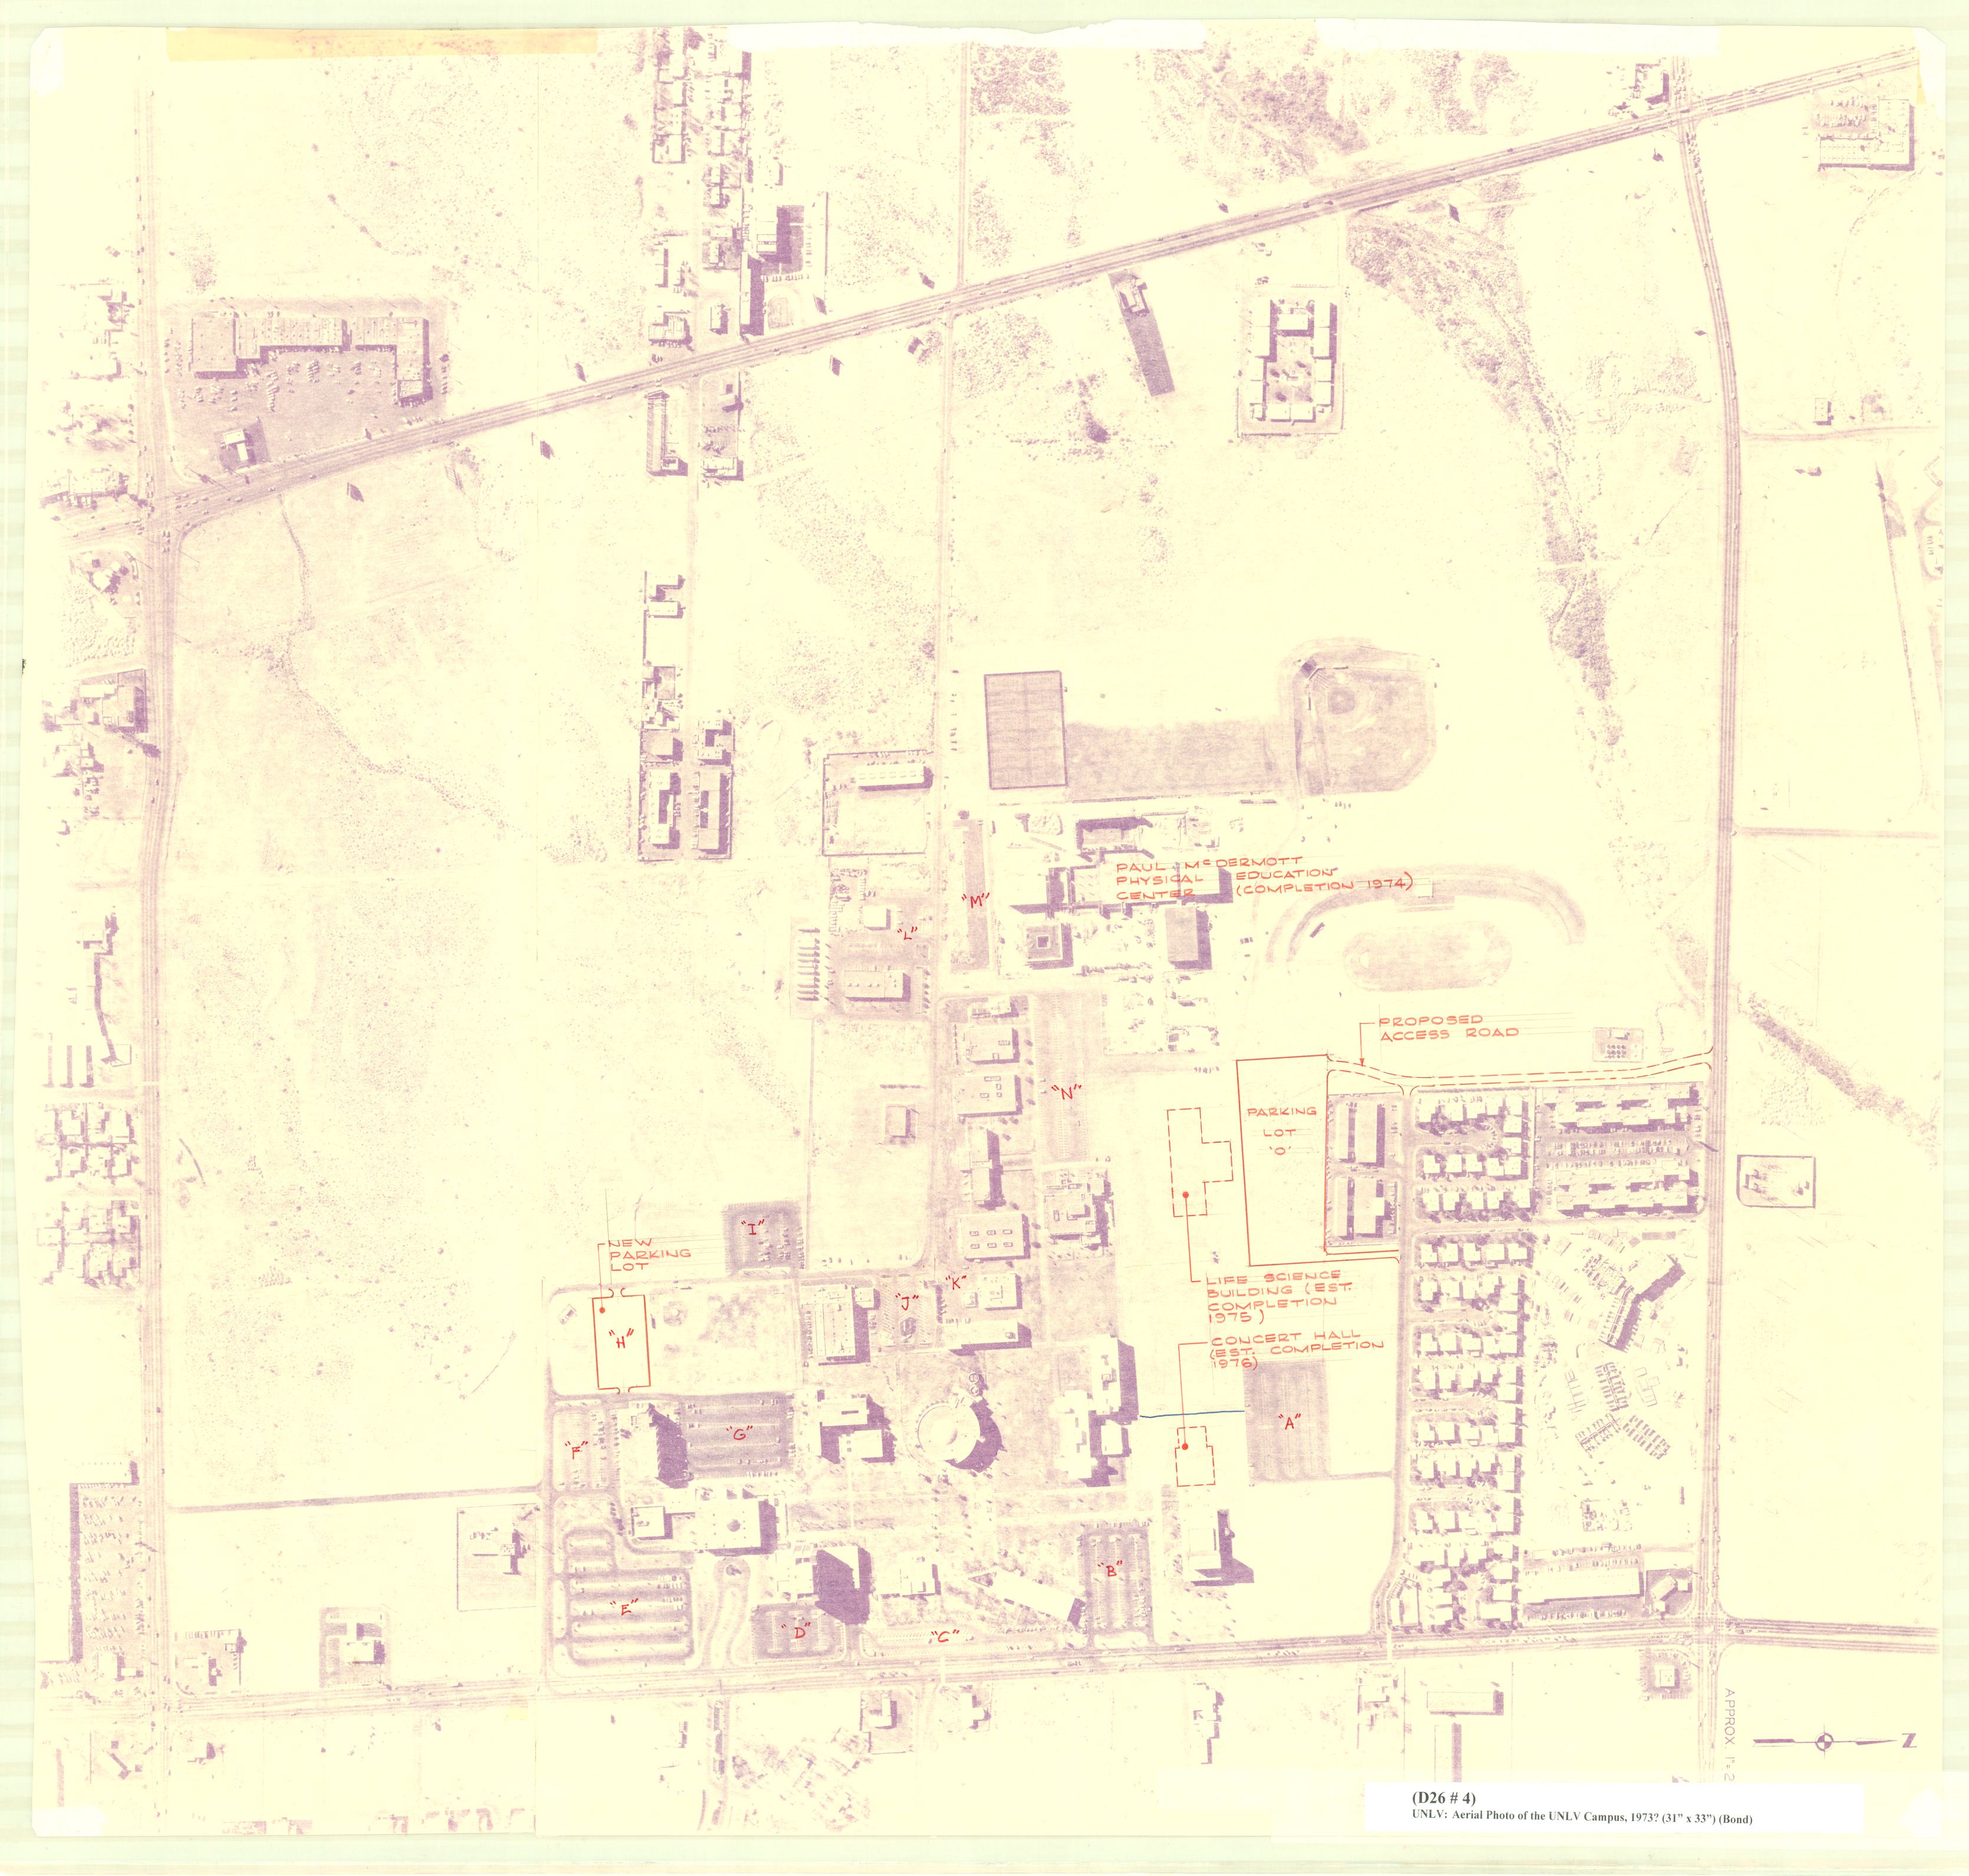 Nevada Southern University master plan: architectural drawings, image 006